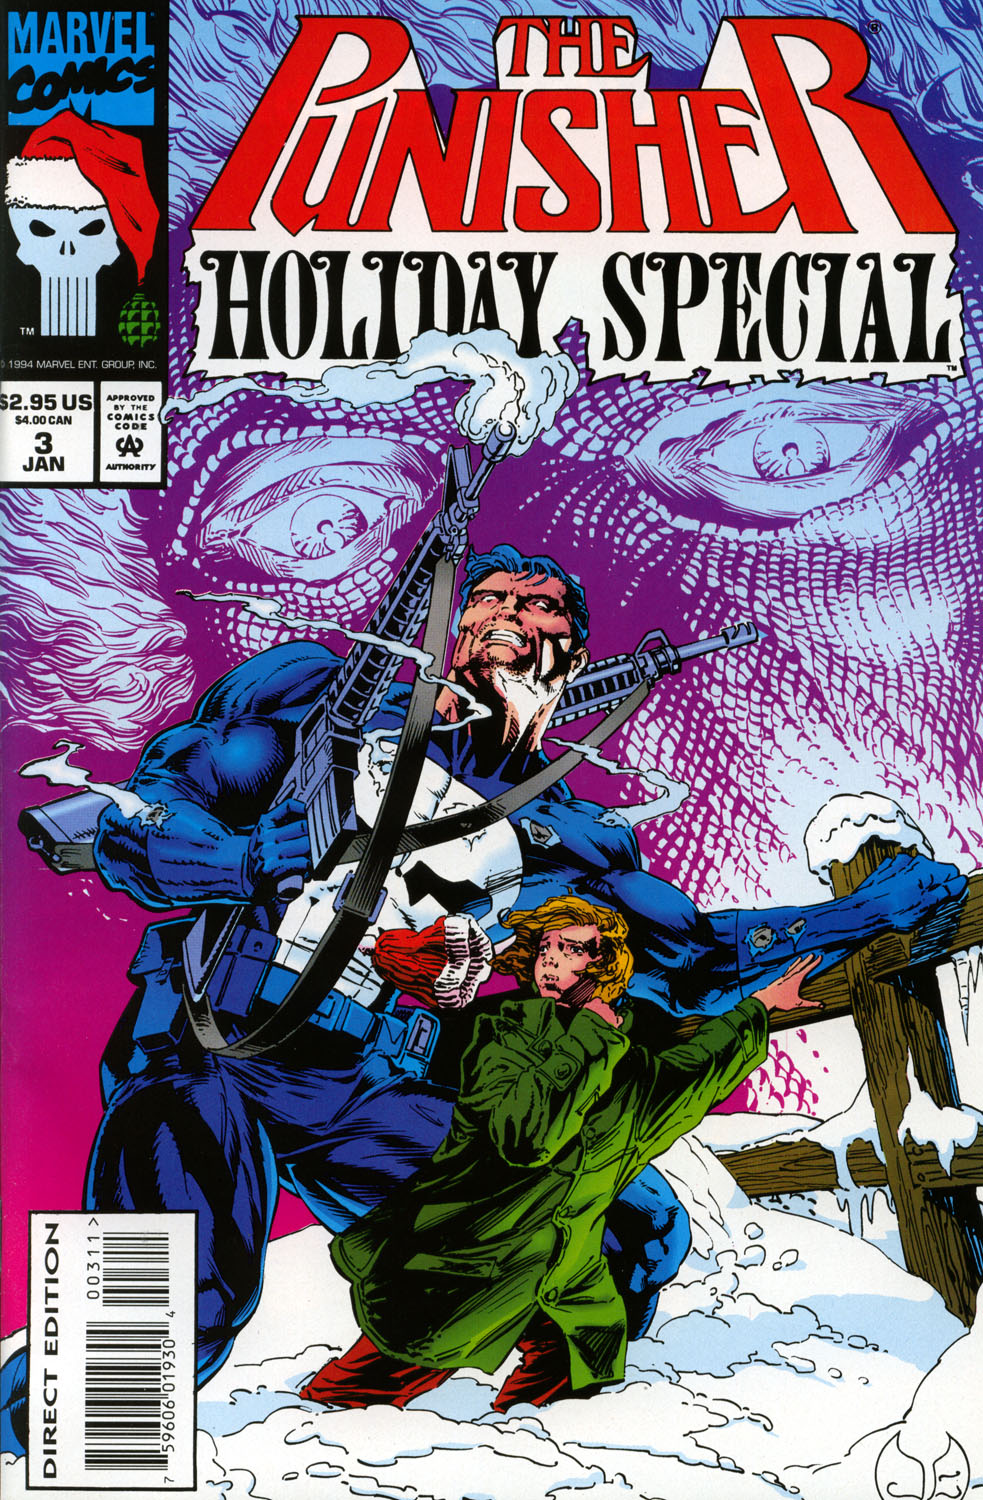 Read online The Punisher Holiday Special comic -  Issue #3 - 1